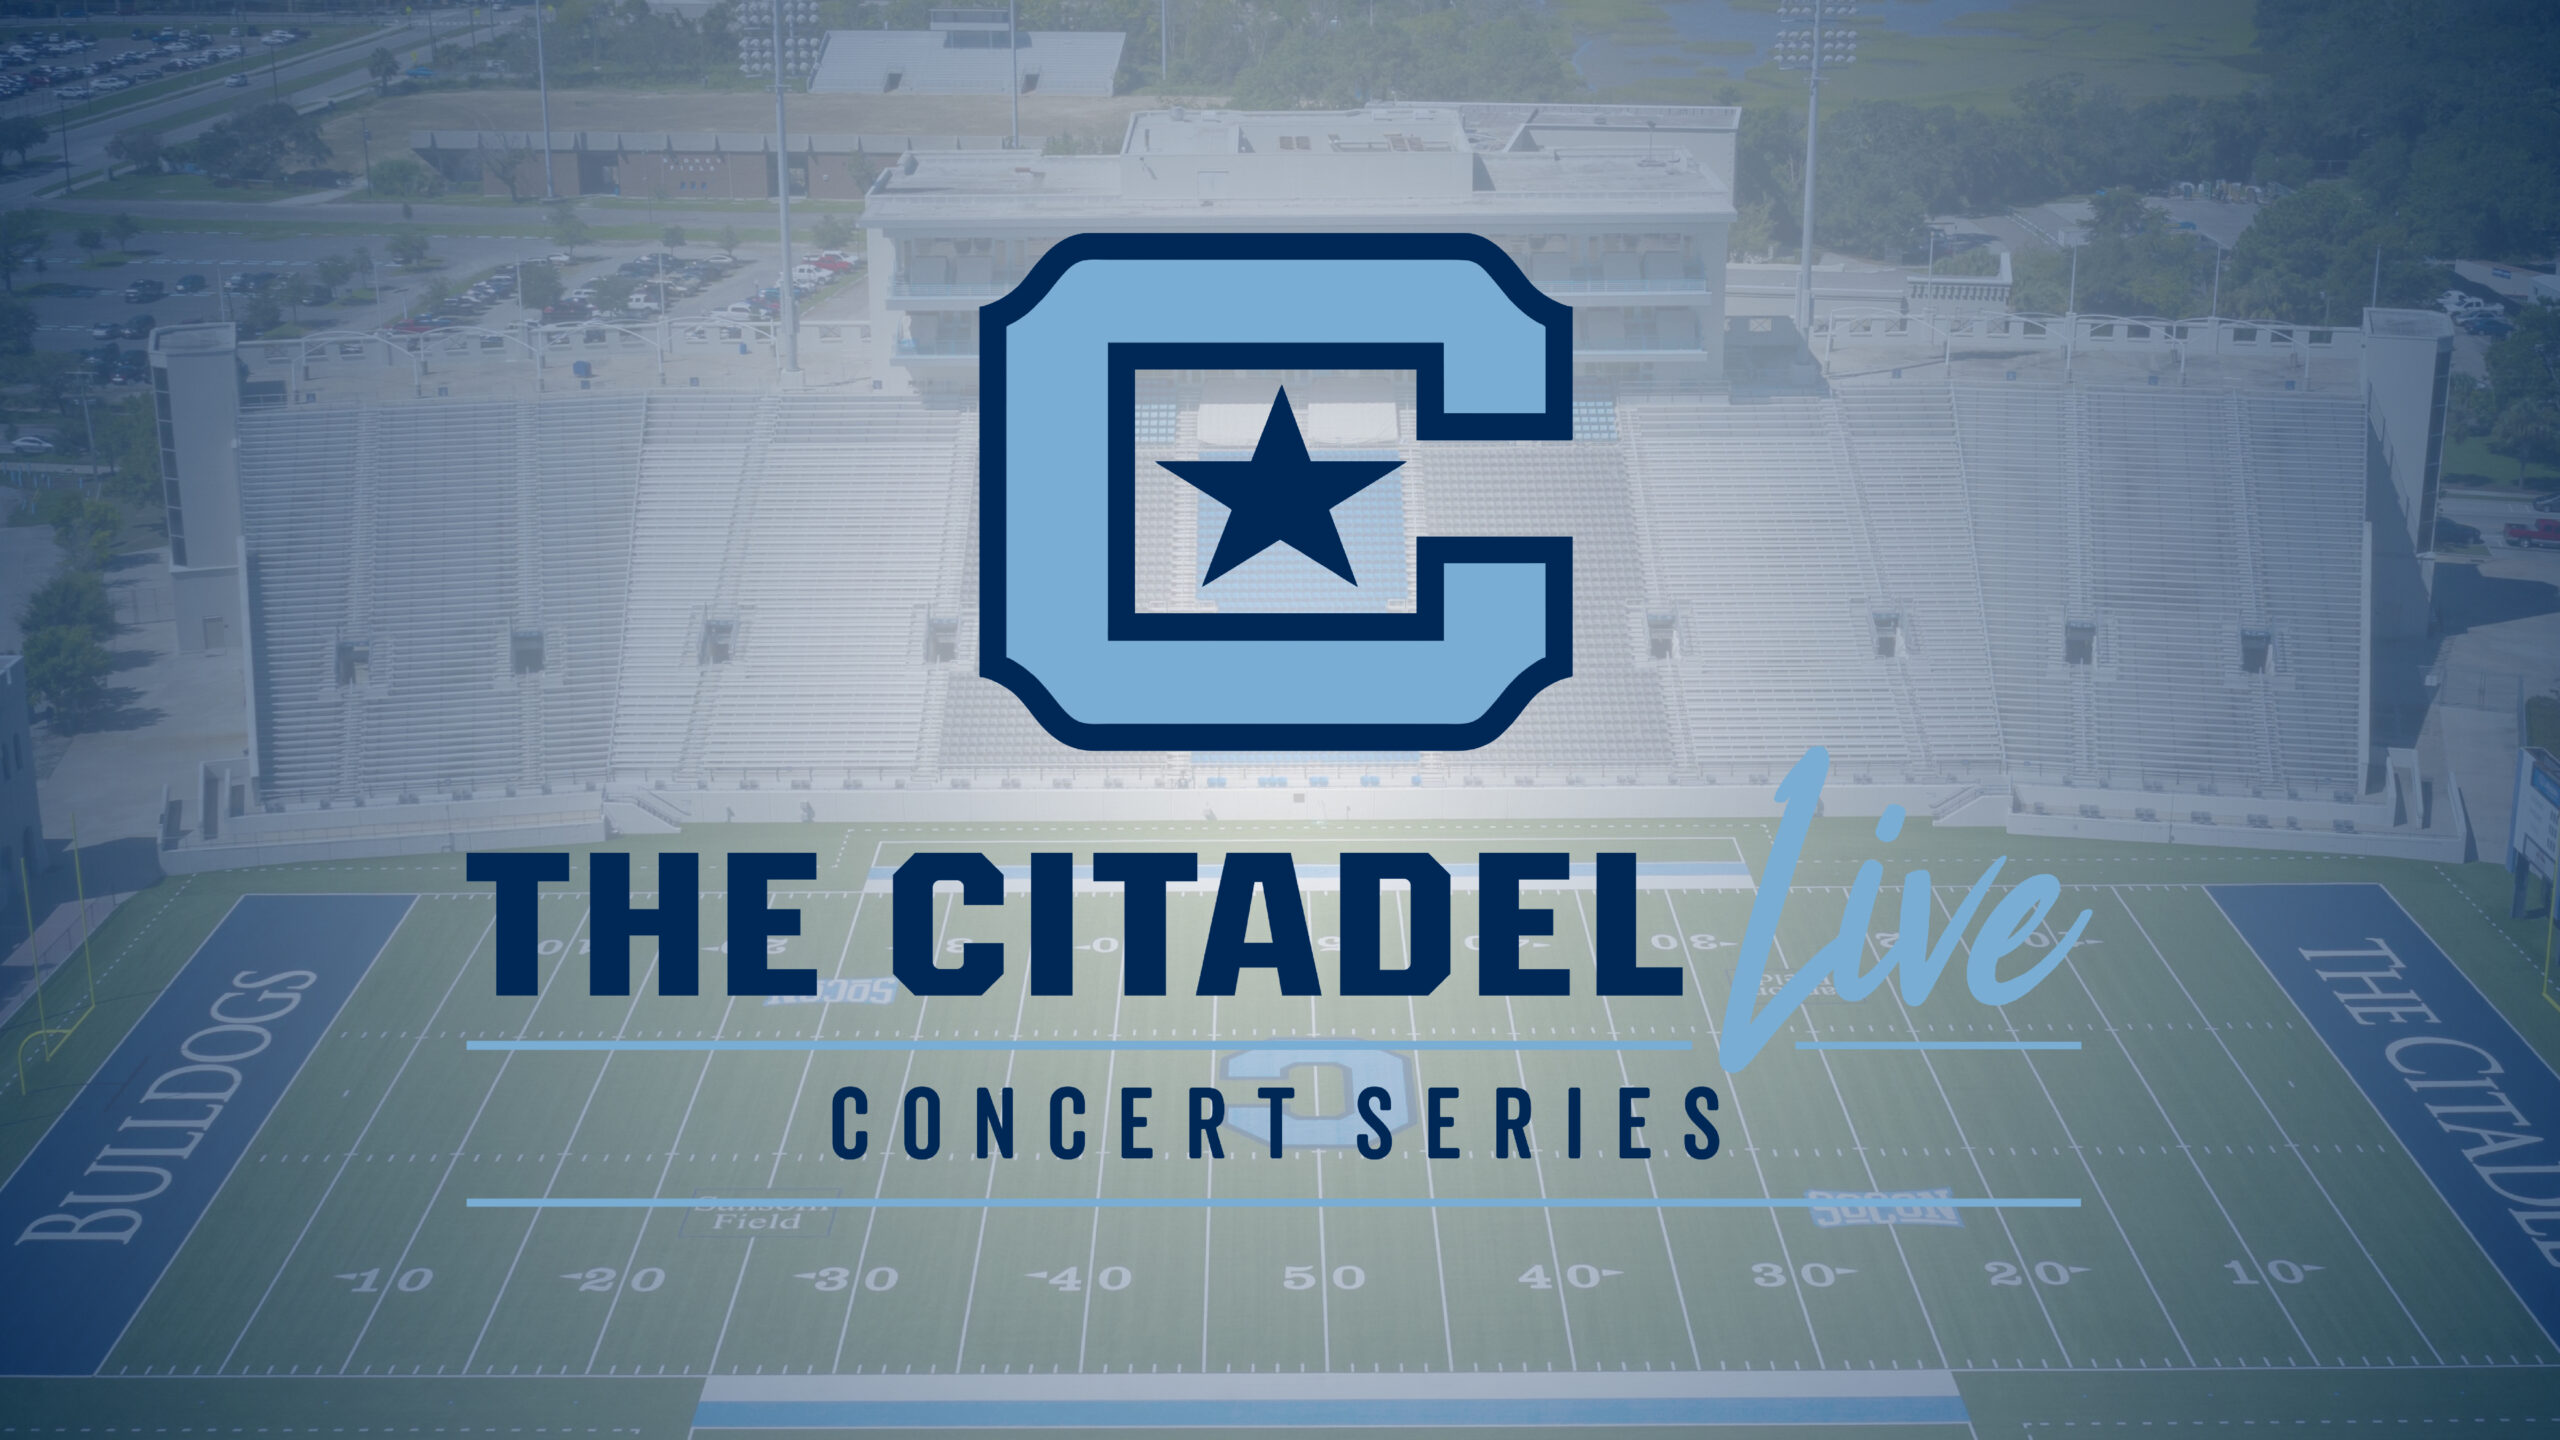 The Citadel and Southern Entertainment partner to bring world